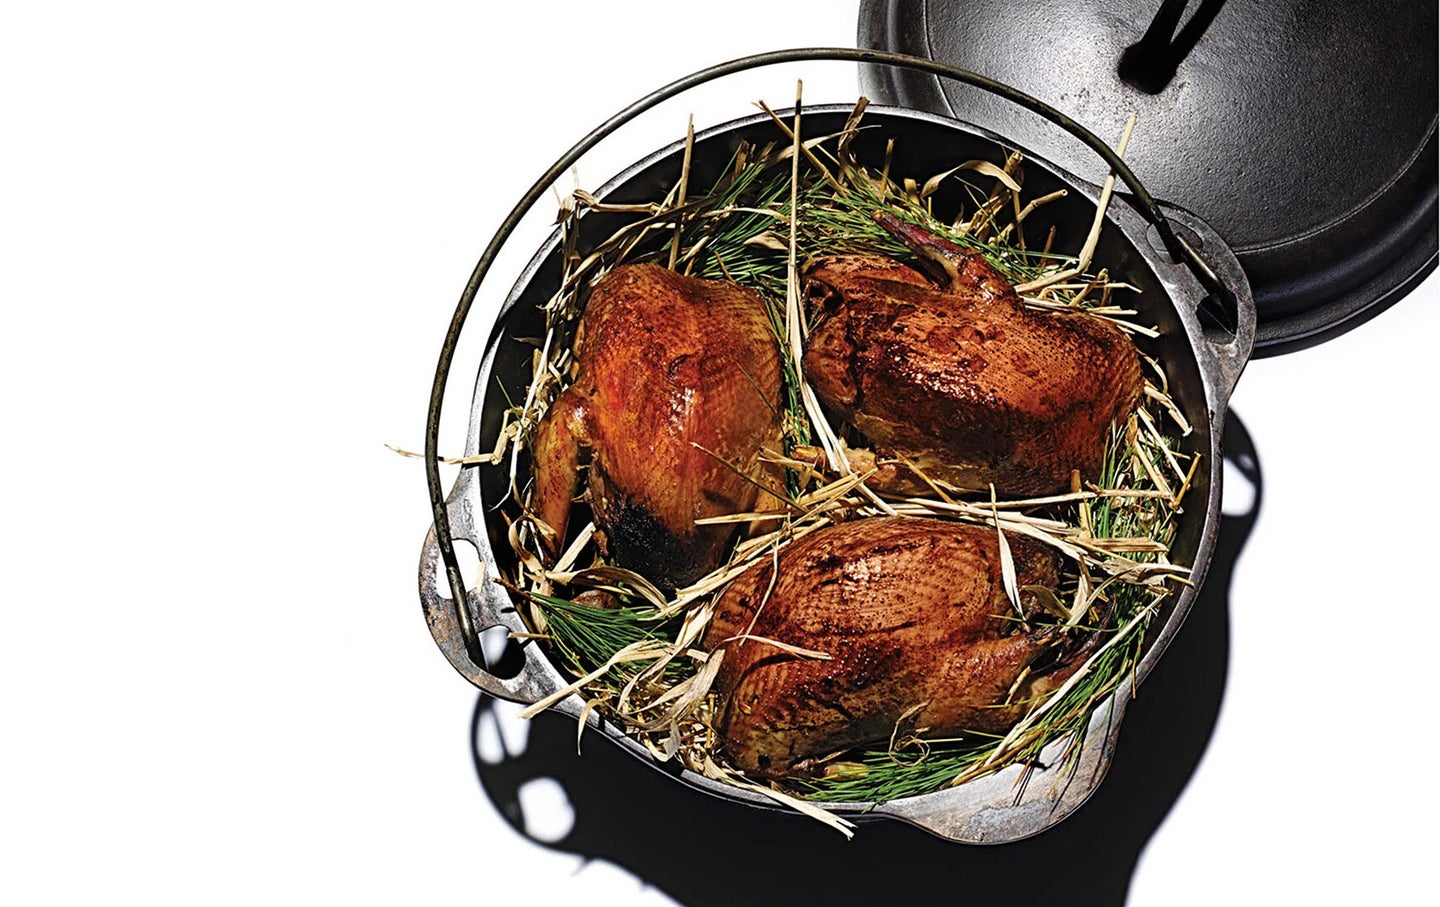 Roasted grouse in a bed of hay and pine.